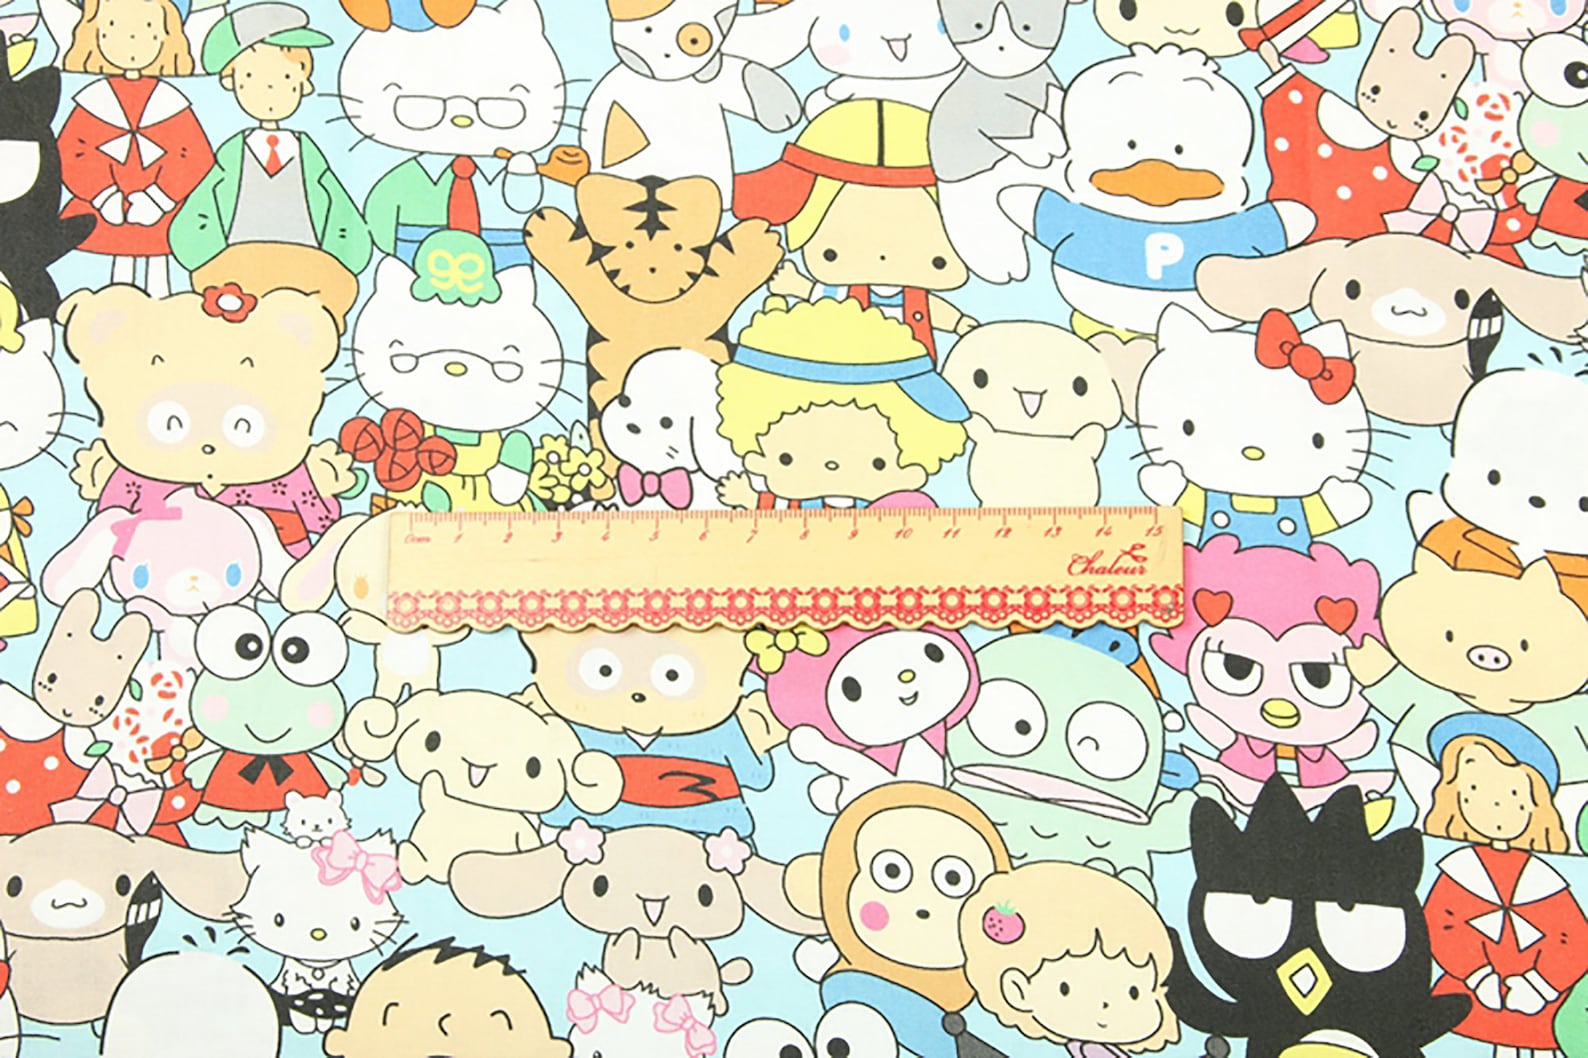 Sanrio Characters Fabric 100% Cotton Fabric Soft Cotton | Etsy